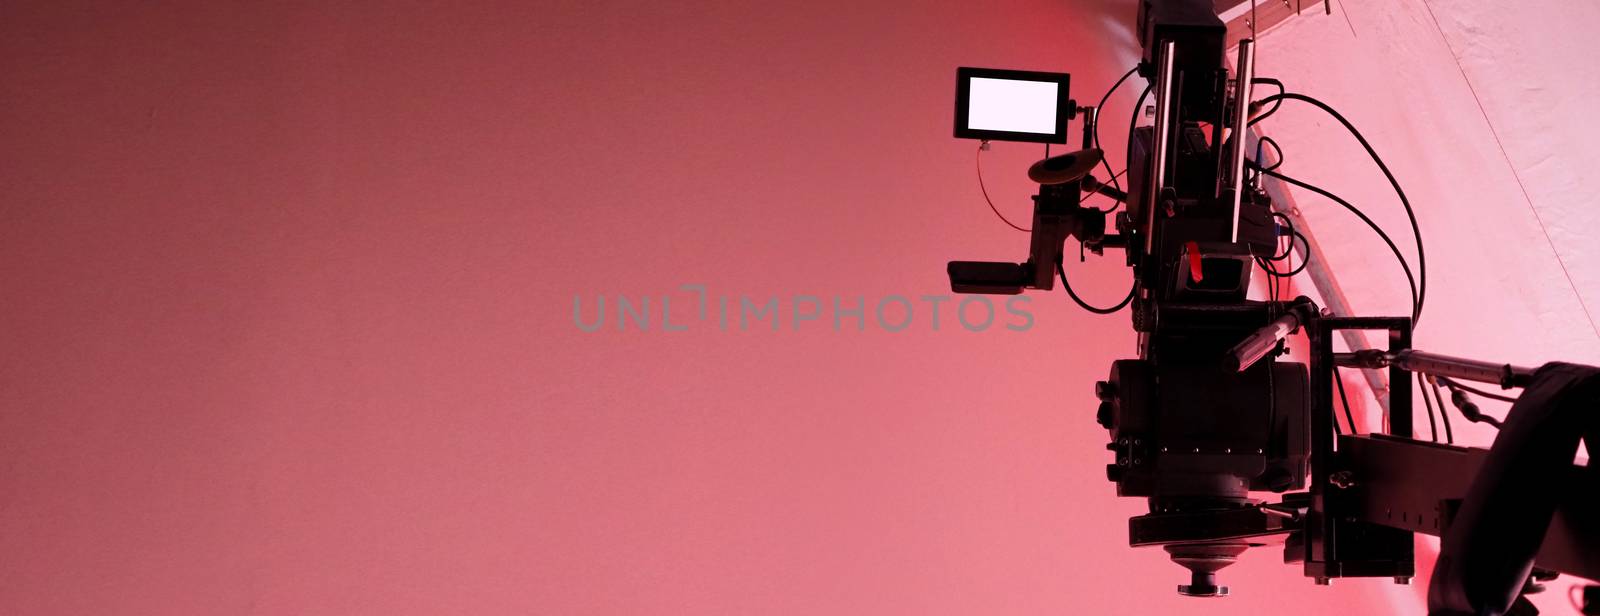 4K high definition video camera monitor on tripod by gnepphoto